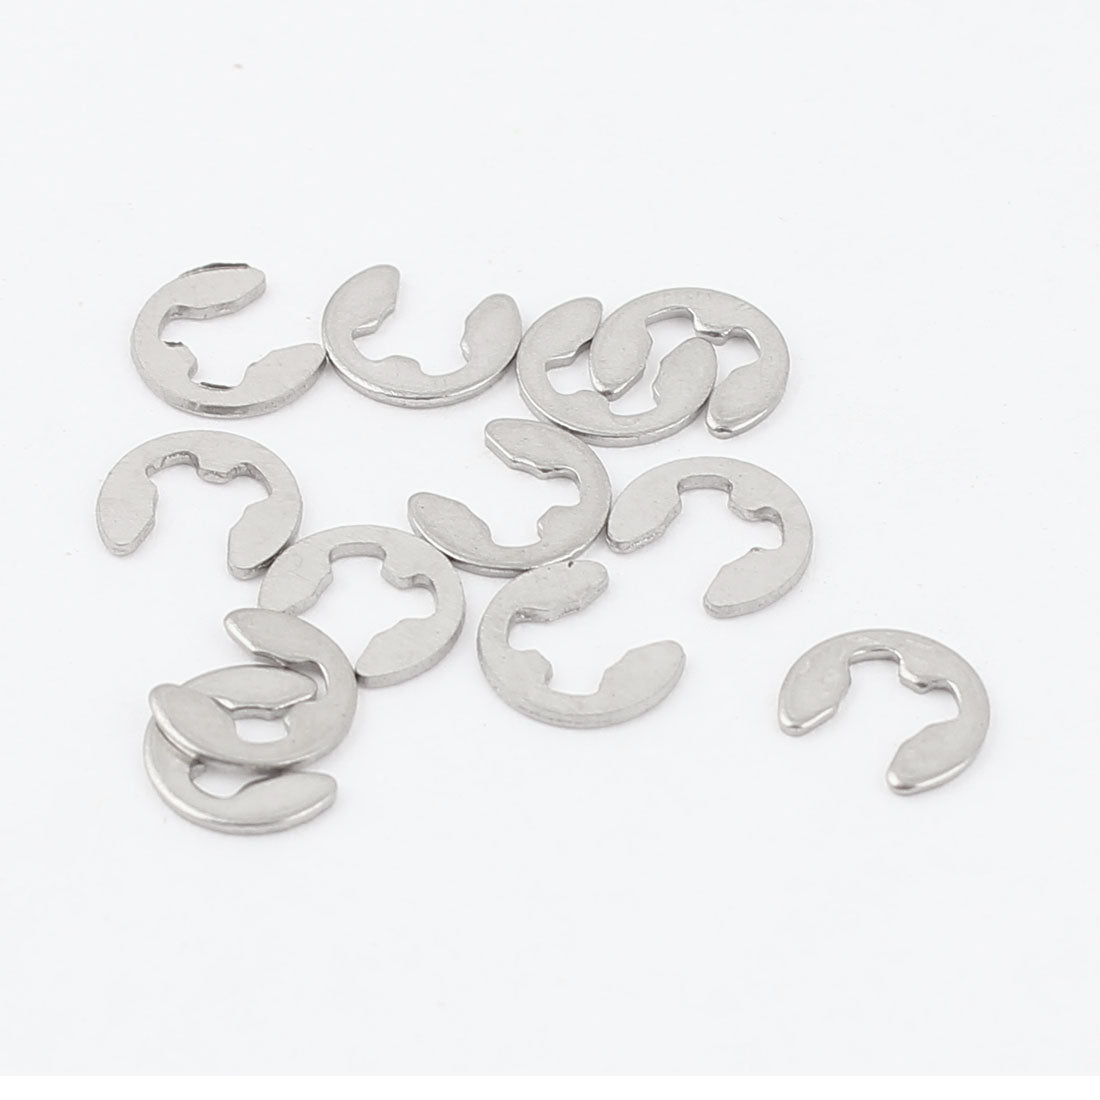 uxcell Uxcell 10pcs 304 Stainless Steel Fastener External Retaining Ring E-Clip Circlip 3mm